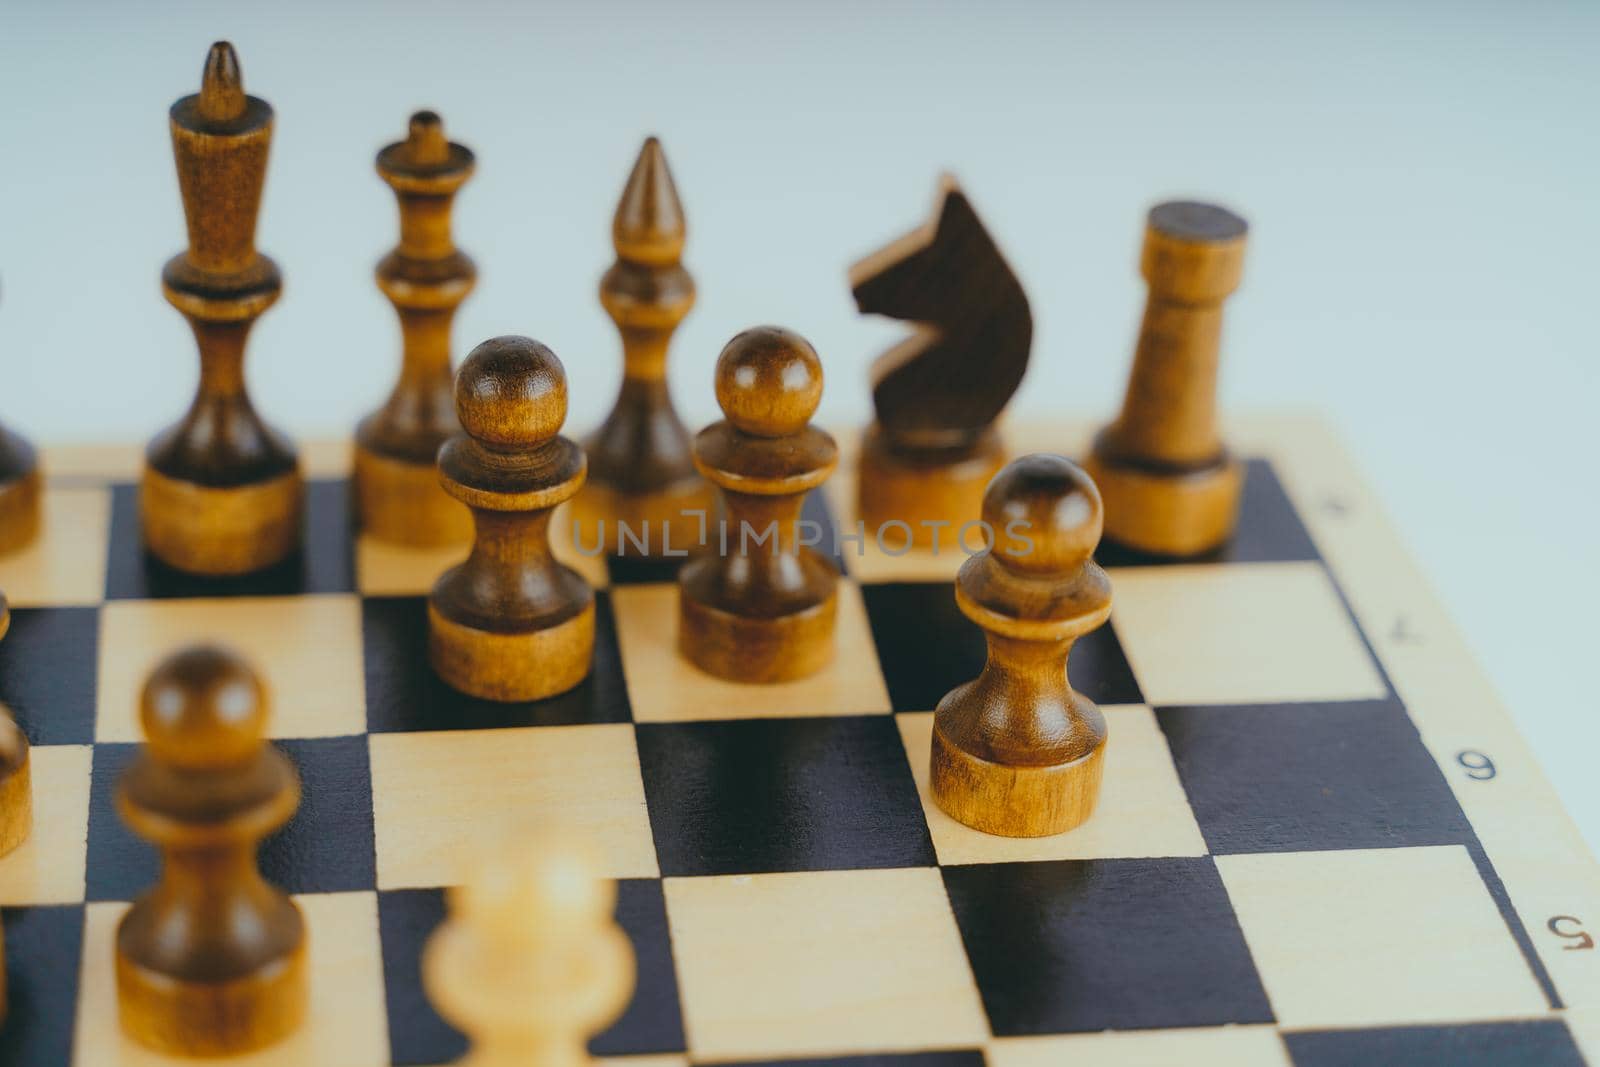 White and black wooden pieces on a chessboard. A chessboard set up during a game on a white background